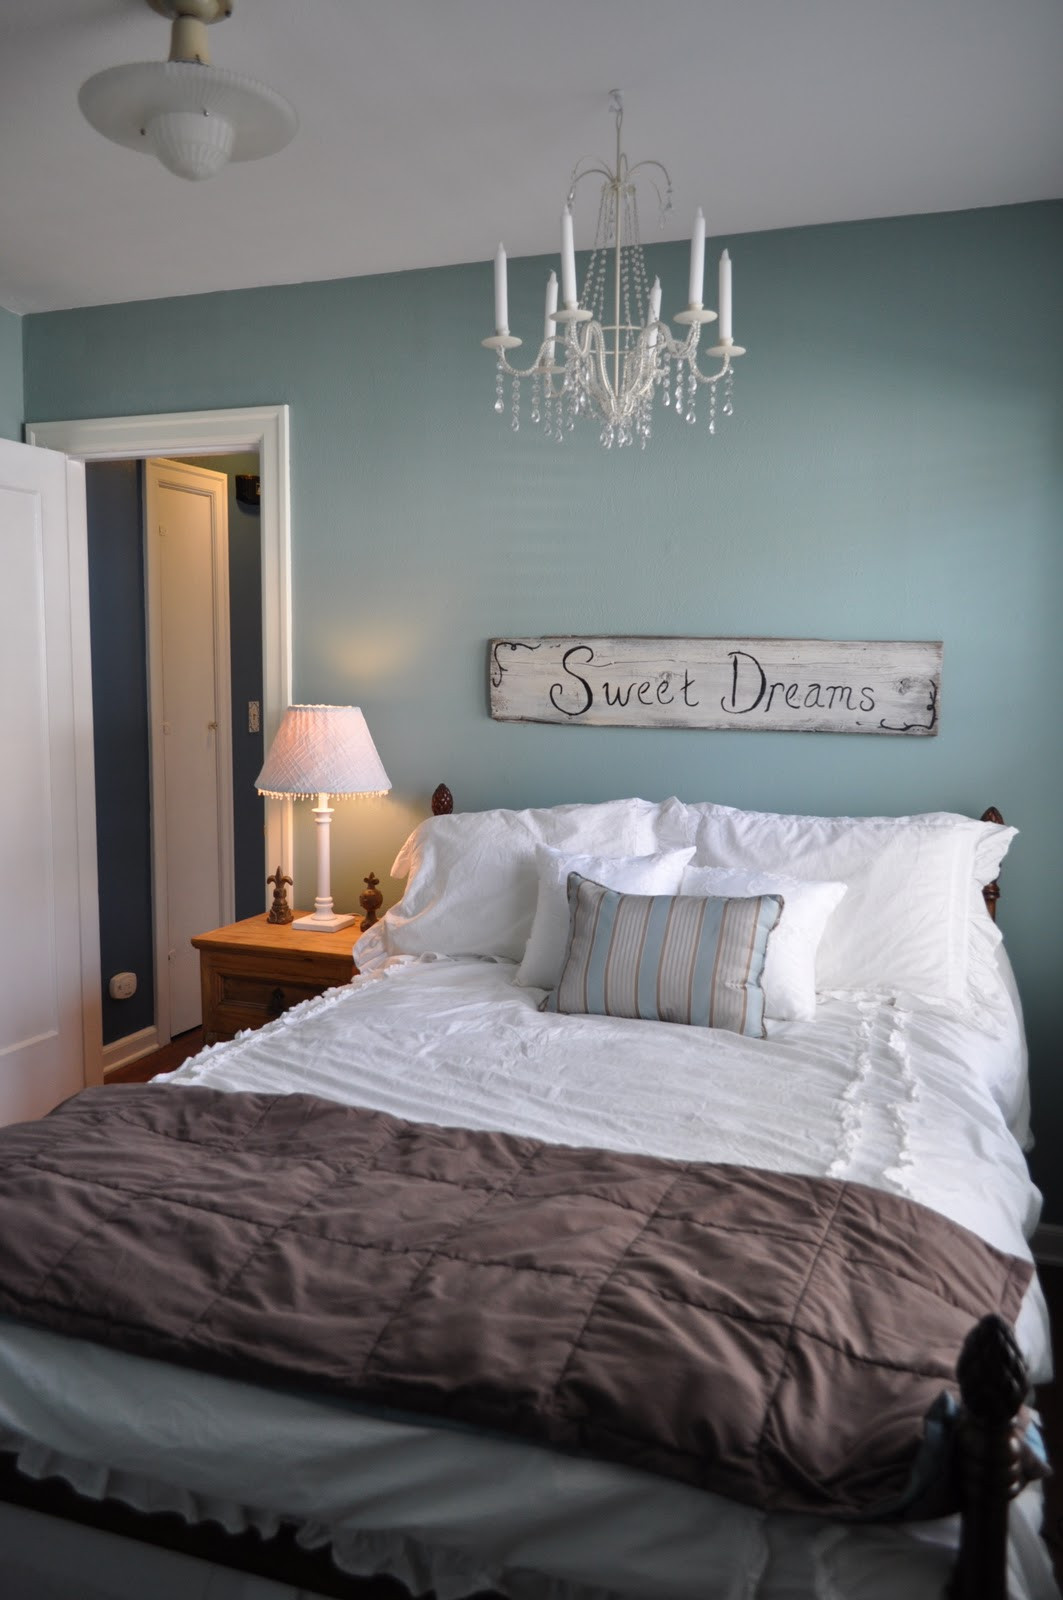 Beach Paint Colors For Bedroom
 Bedroom Wall Painting Love this color just reminds me